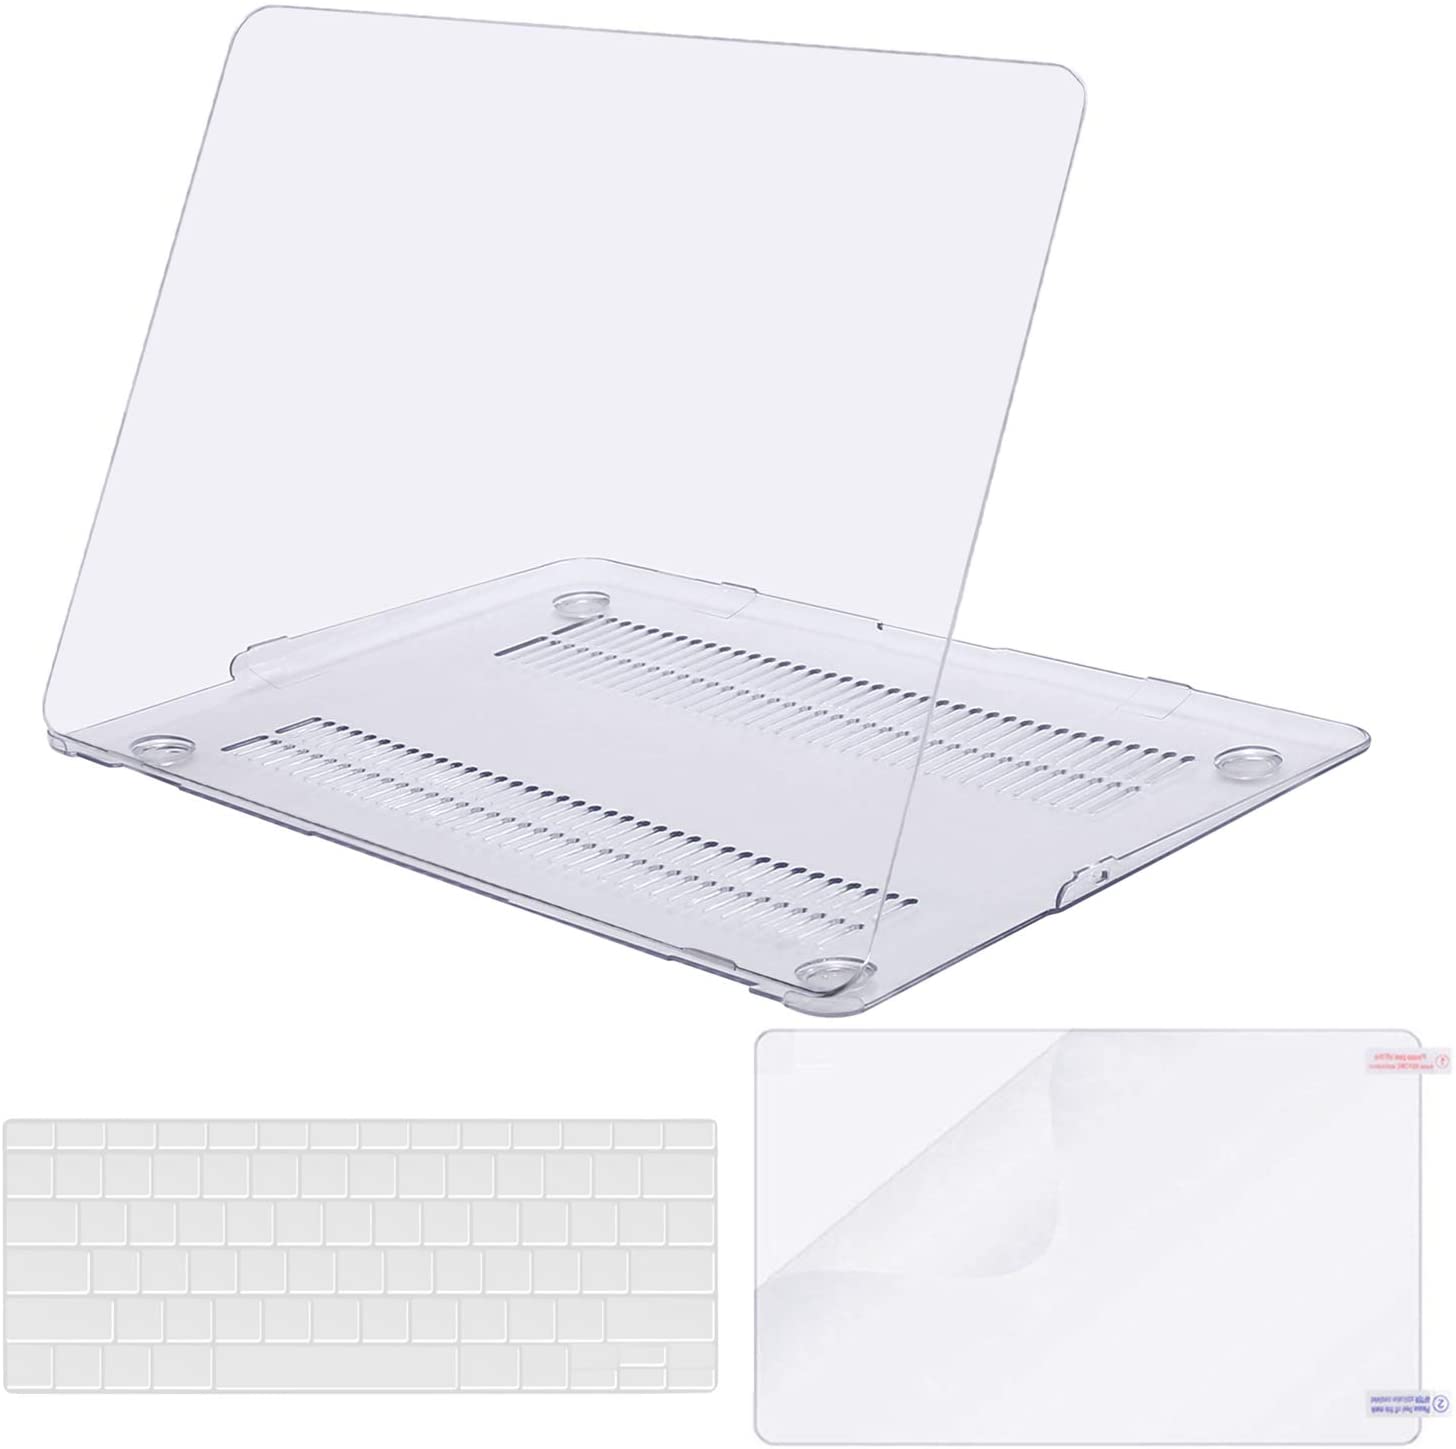 CLear white -  MacBook Air 13 inch Case 2009 - 2017 Release. Hard case only - e4cents